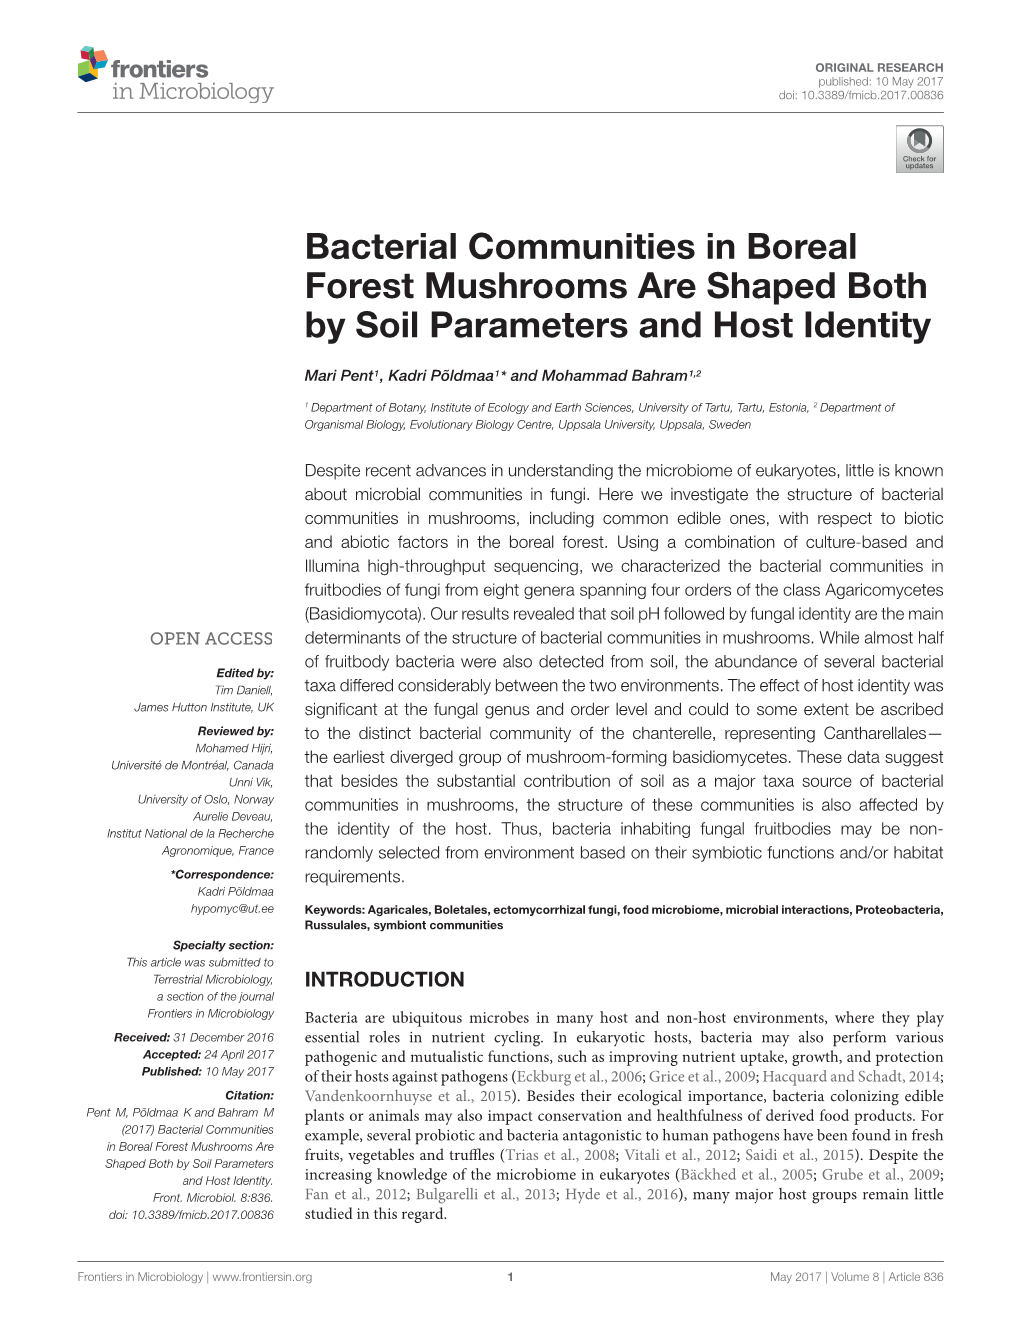 Bacterial Communities in Boreal Forest Mushrooms Are Shaped Both by Soil Parameters and Host Identity